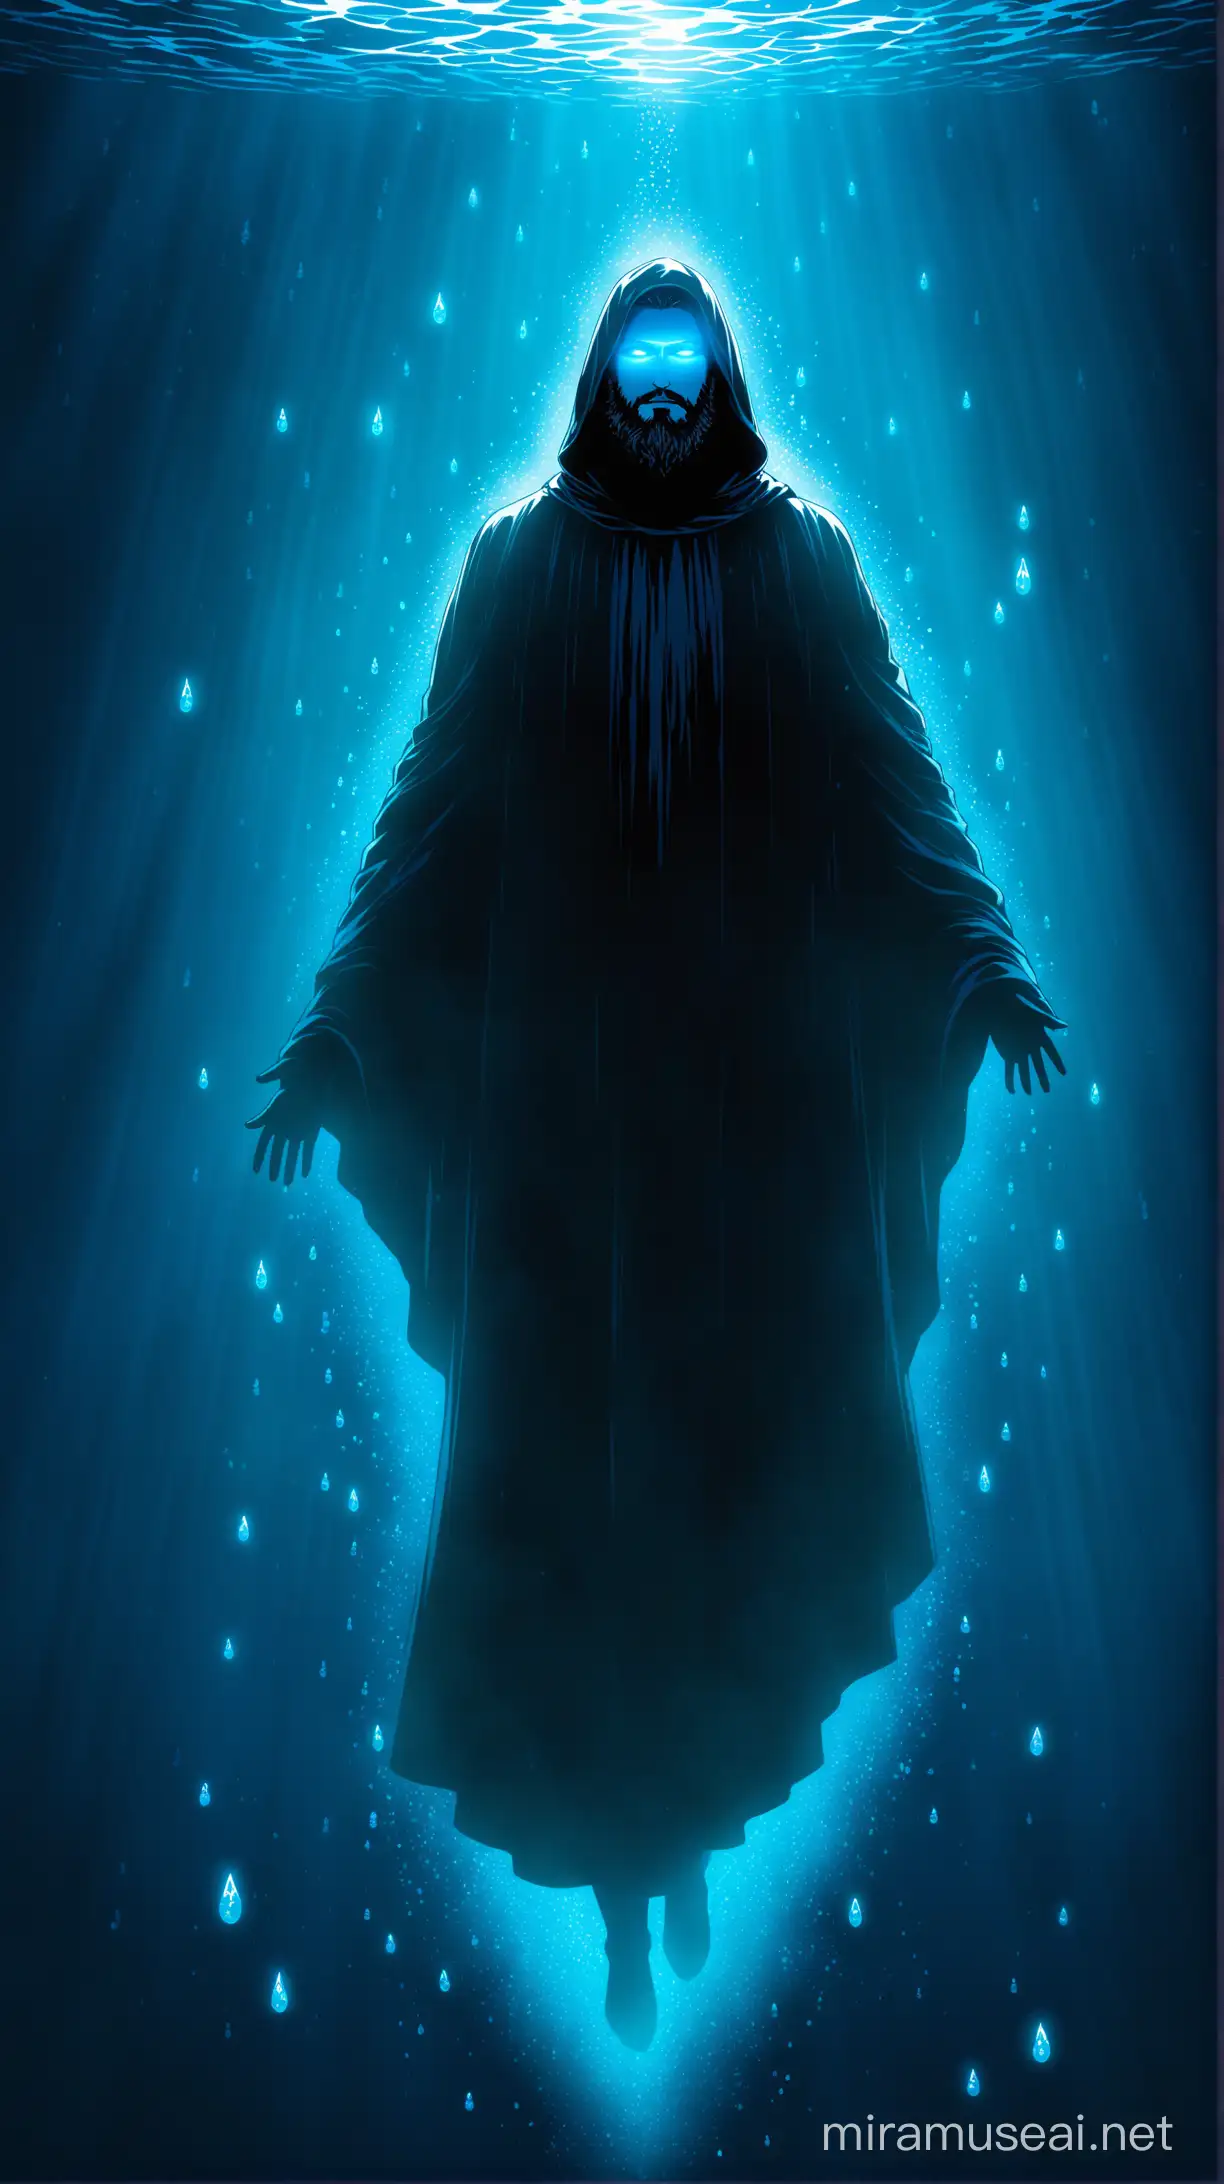 a silhouette of a male robed figure with a beard and two glowing blue eyes, rising from the depths of the deep ocean, water droplets floating up following him